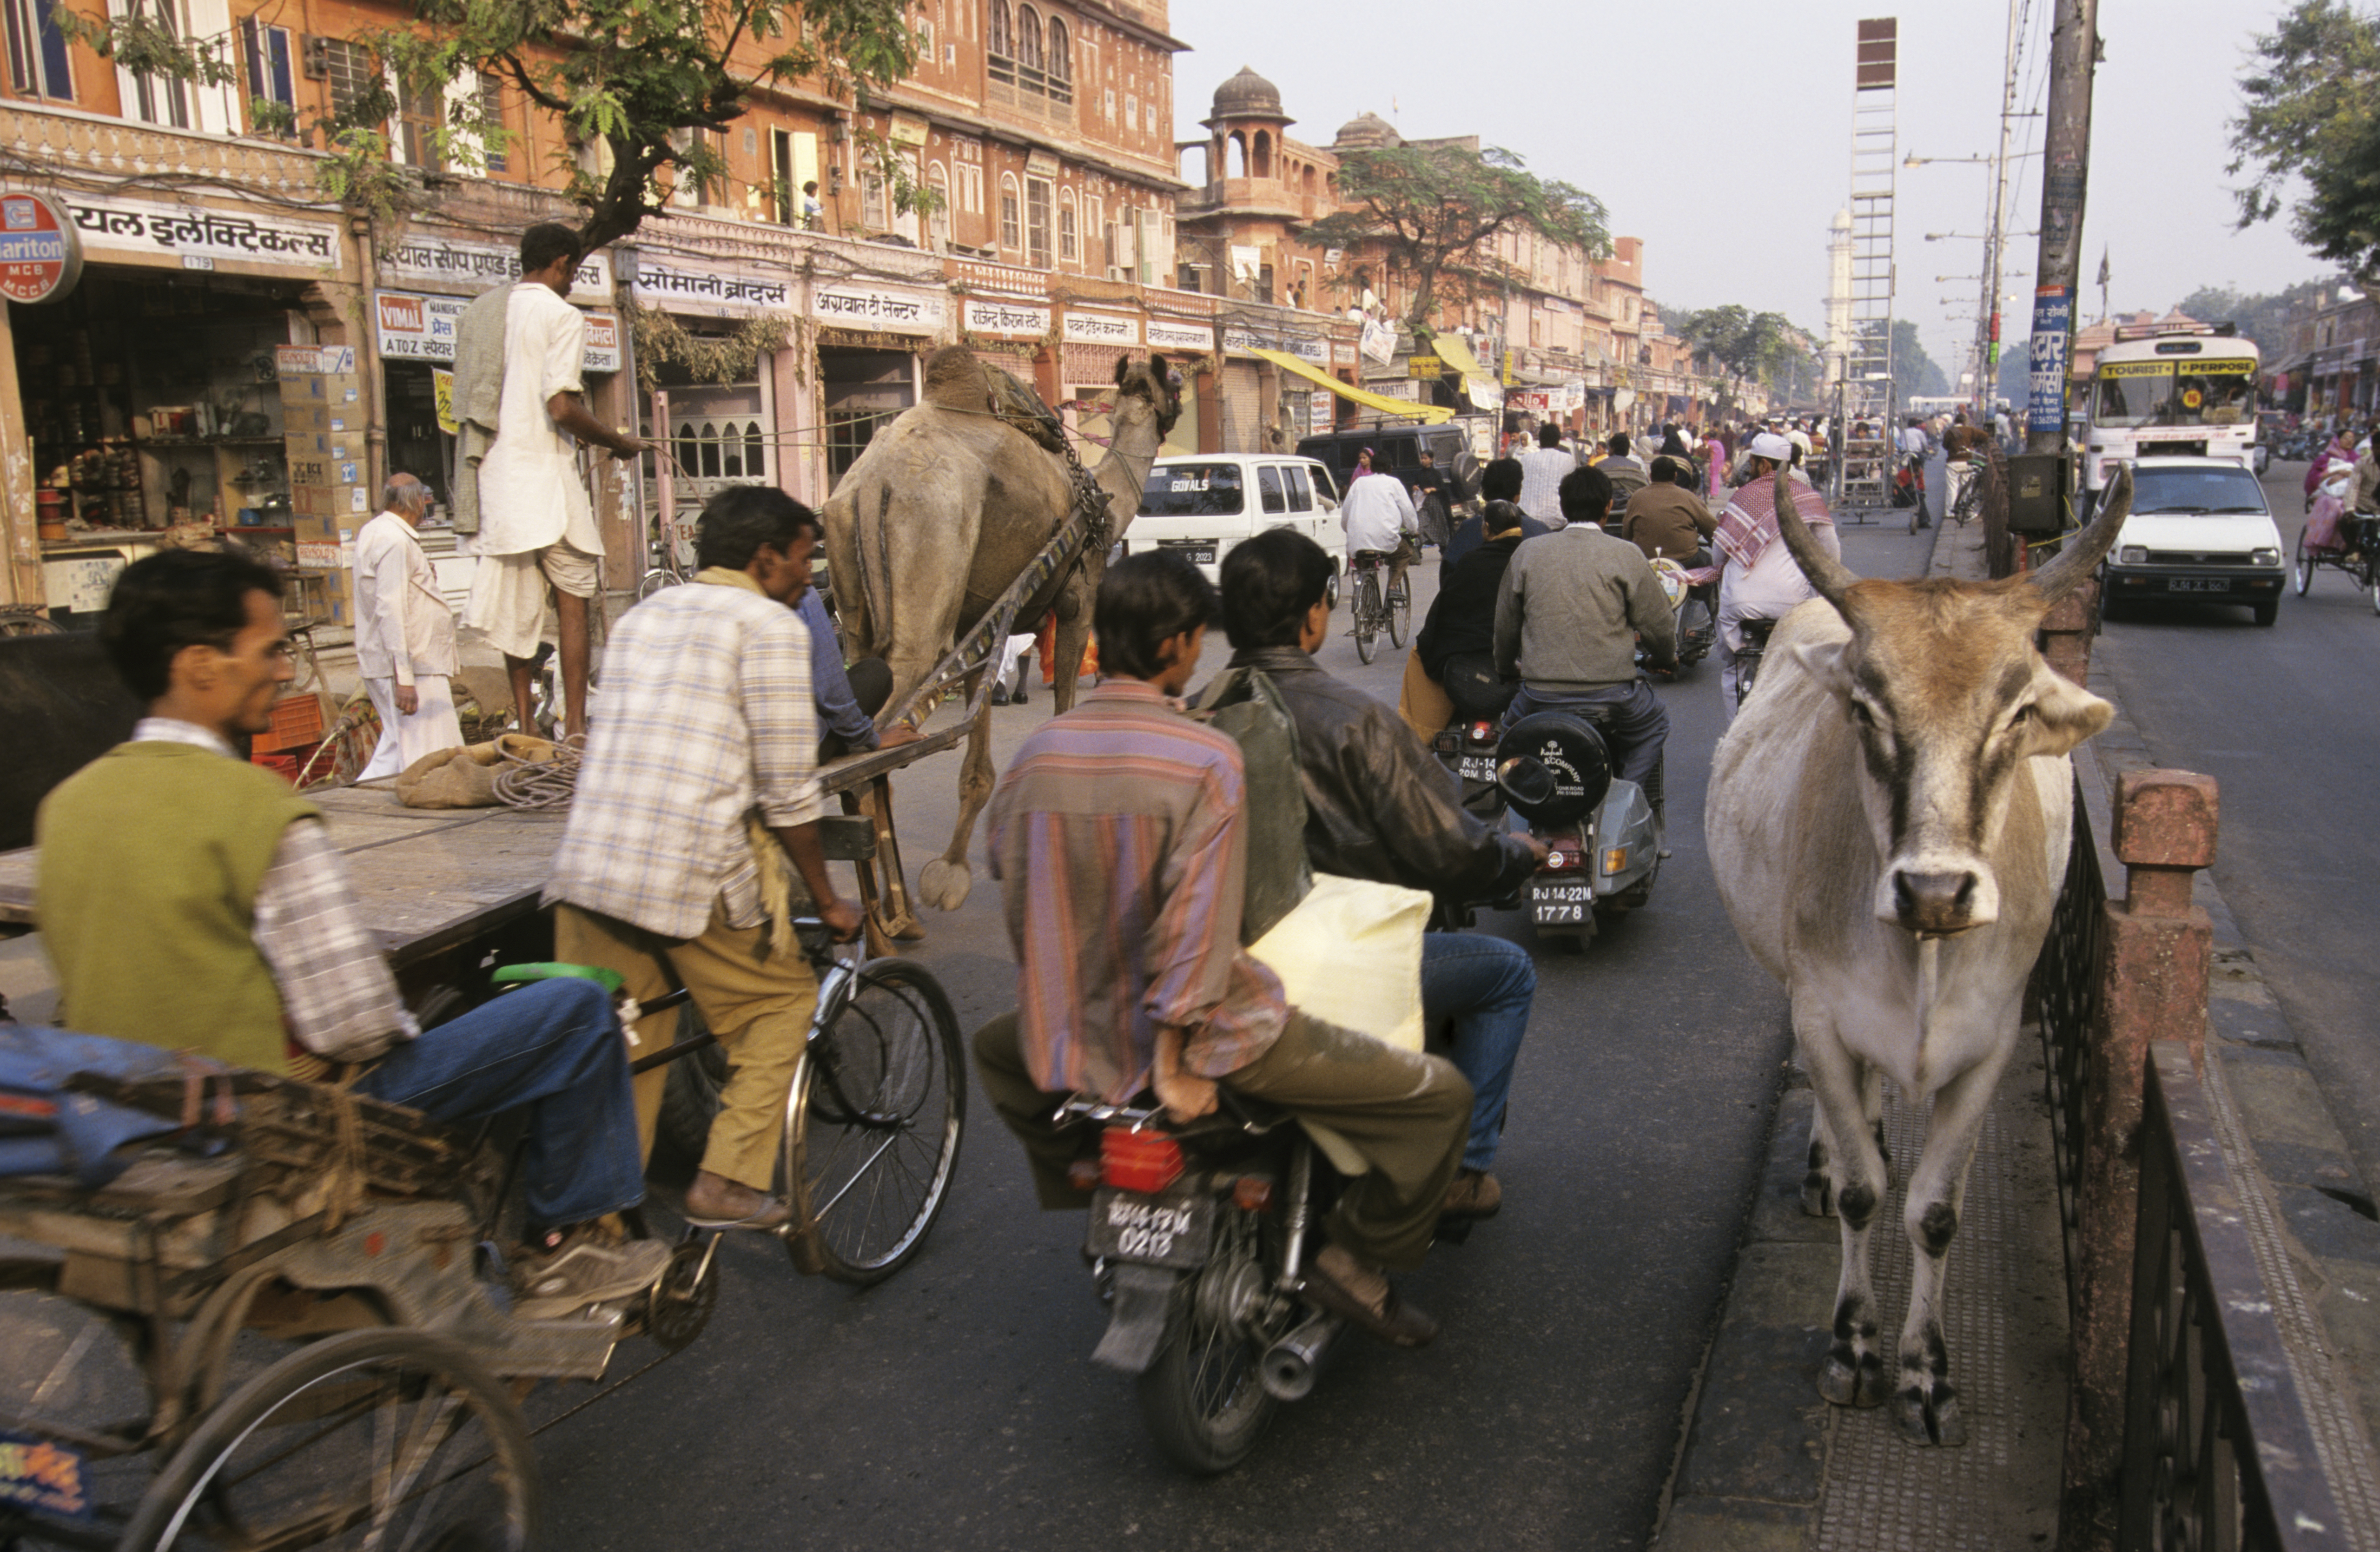 A lone cow stands on the center median, surrounded by a flow of cars, scooters, bicycles and a camel-drawn cart.